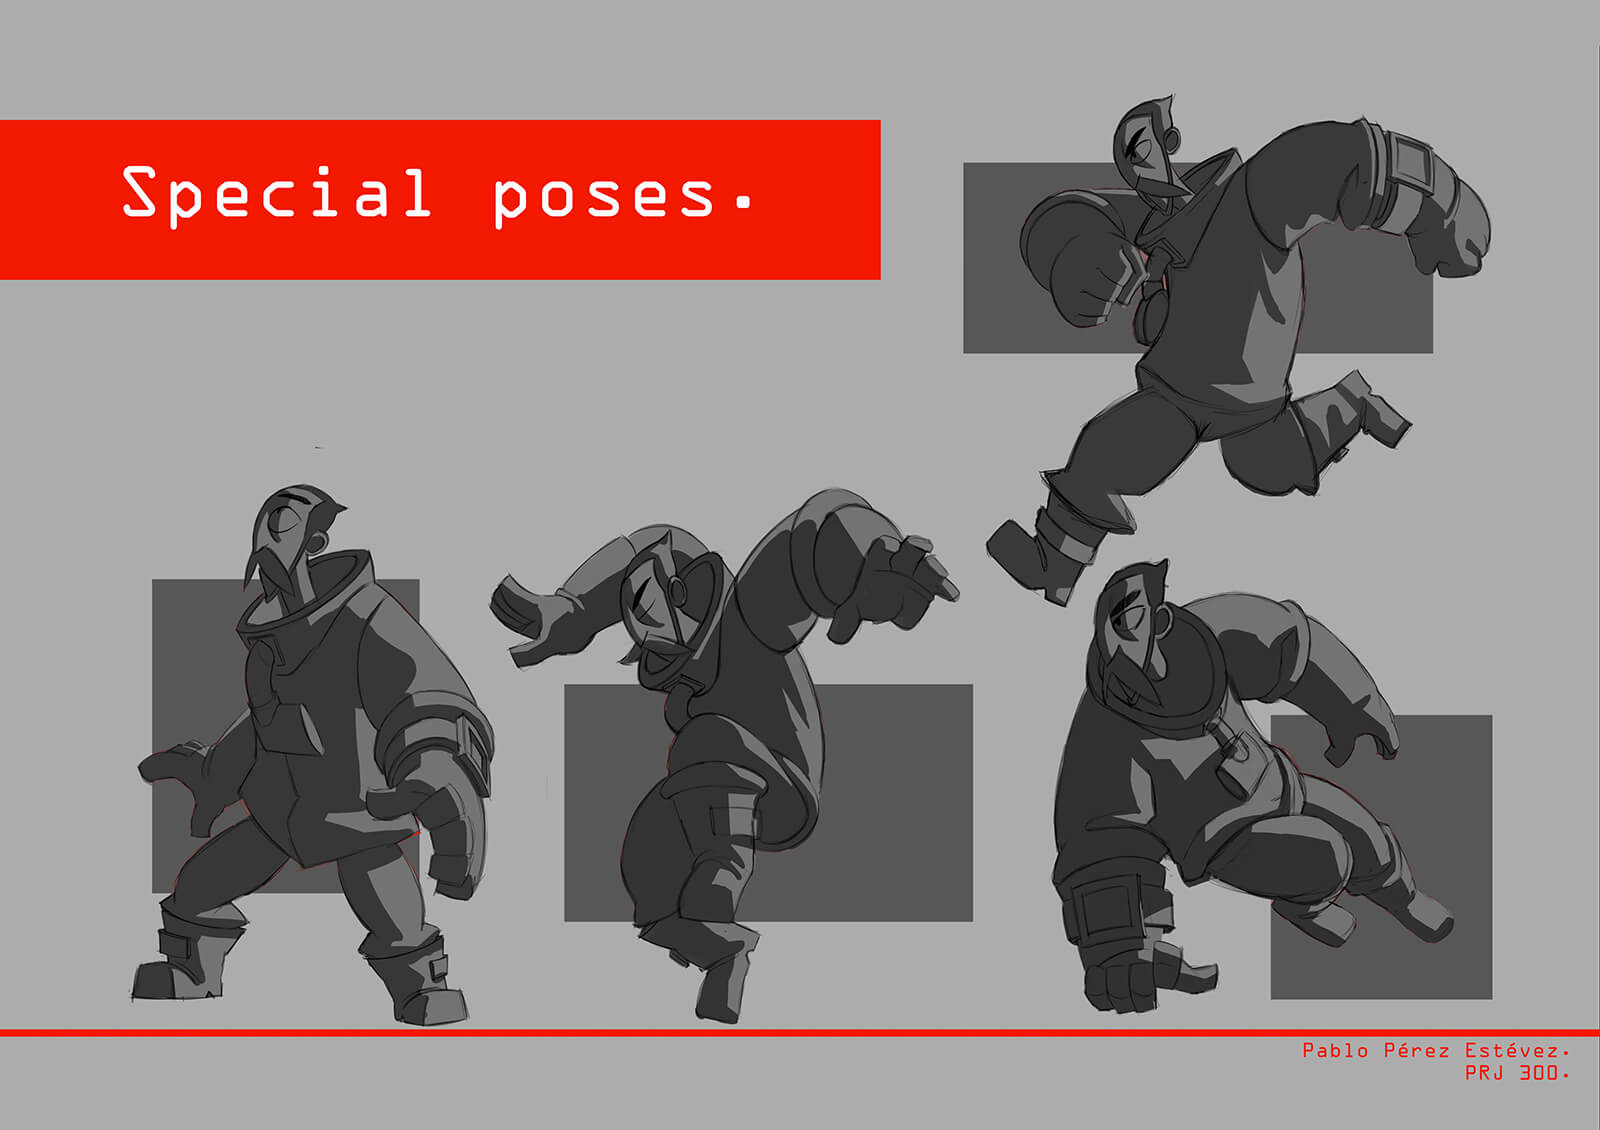 Special pose sketches for the film Core depicting a man in an industrial suit running and jumping